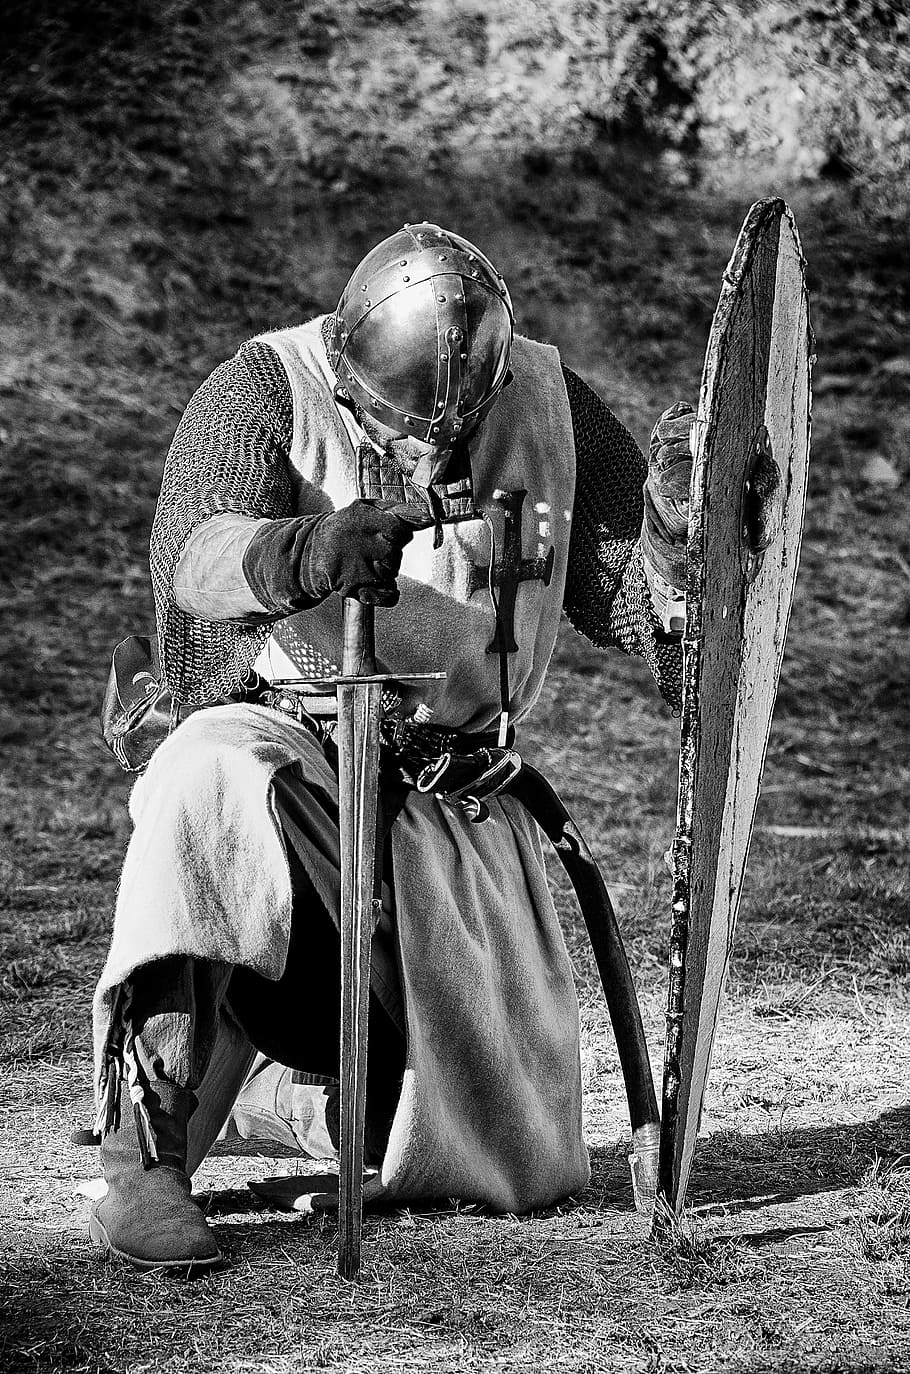 grayscale photo, knight, medieval, fight, sword, warrior, old-fashioned, adult, outdoors, history